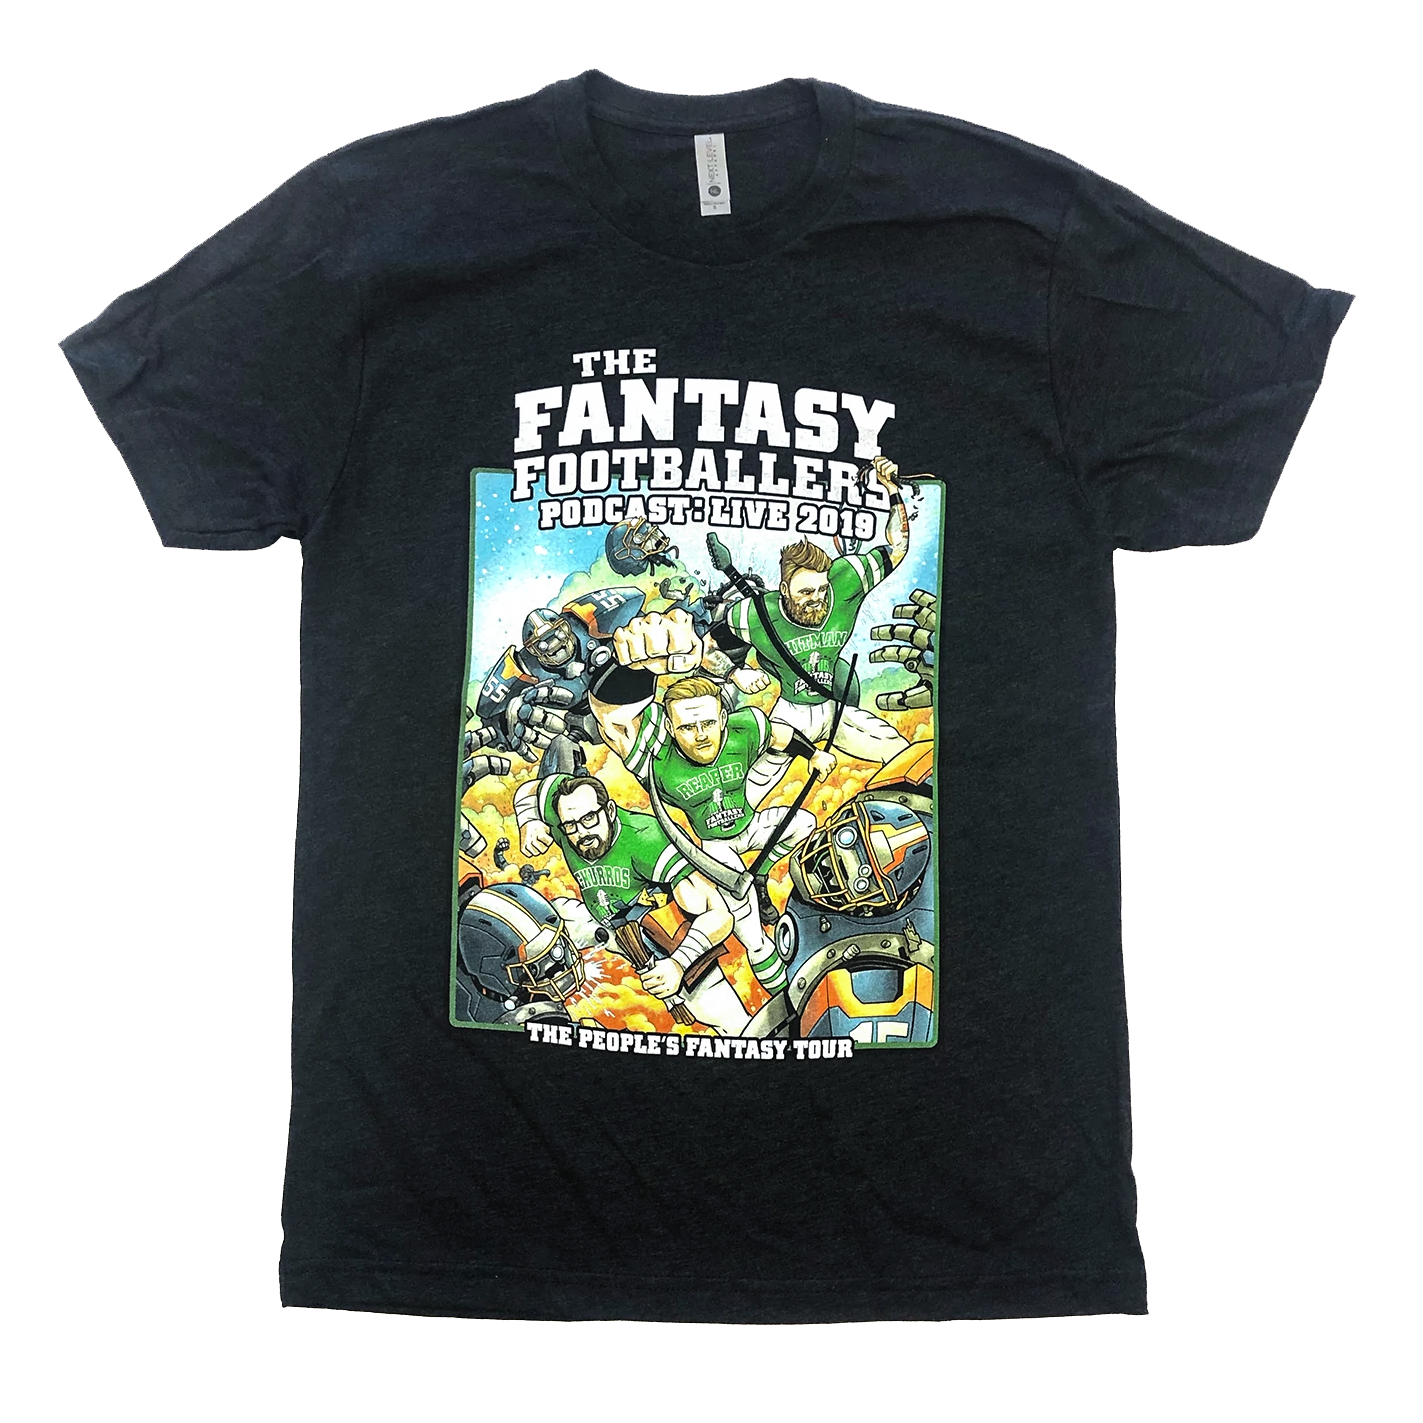 2019 People's Fantasy Live Tour T-Shirt – The Fantasy Footballers